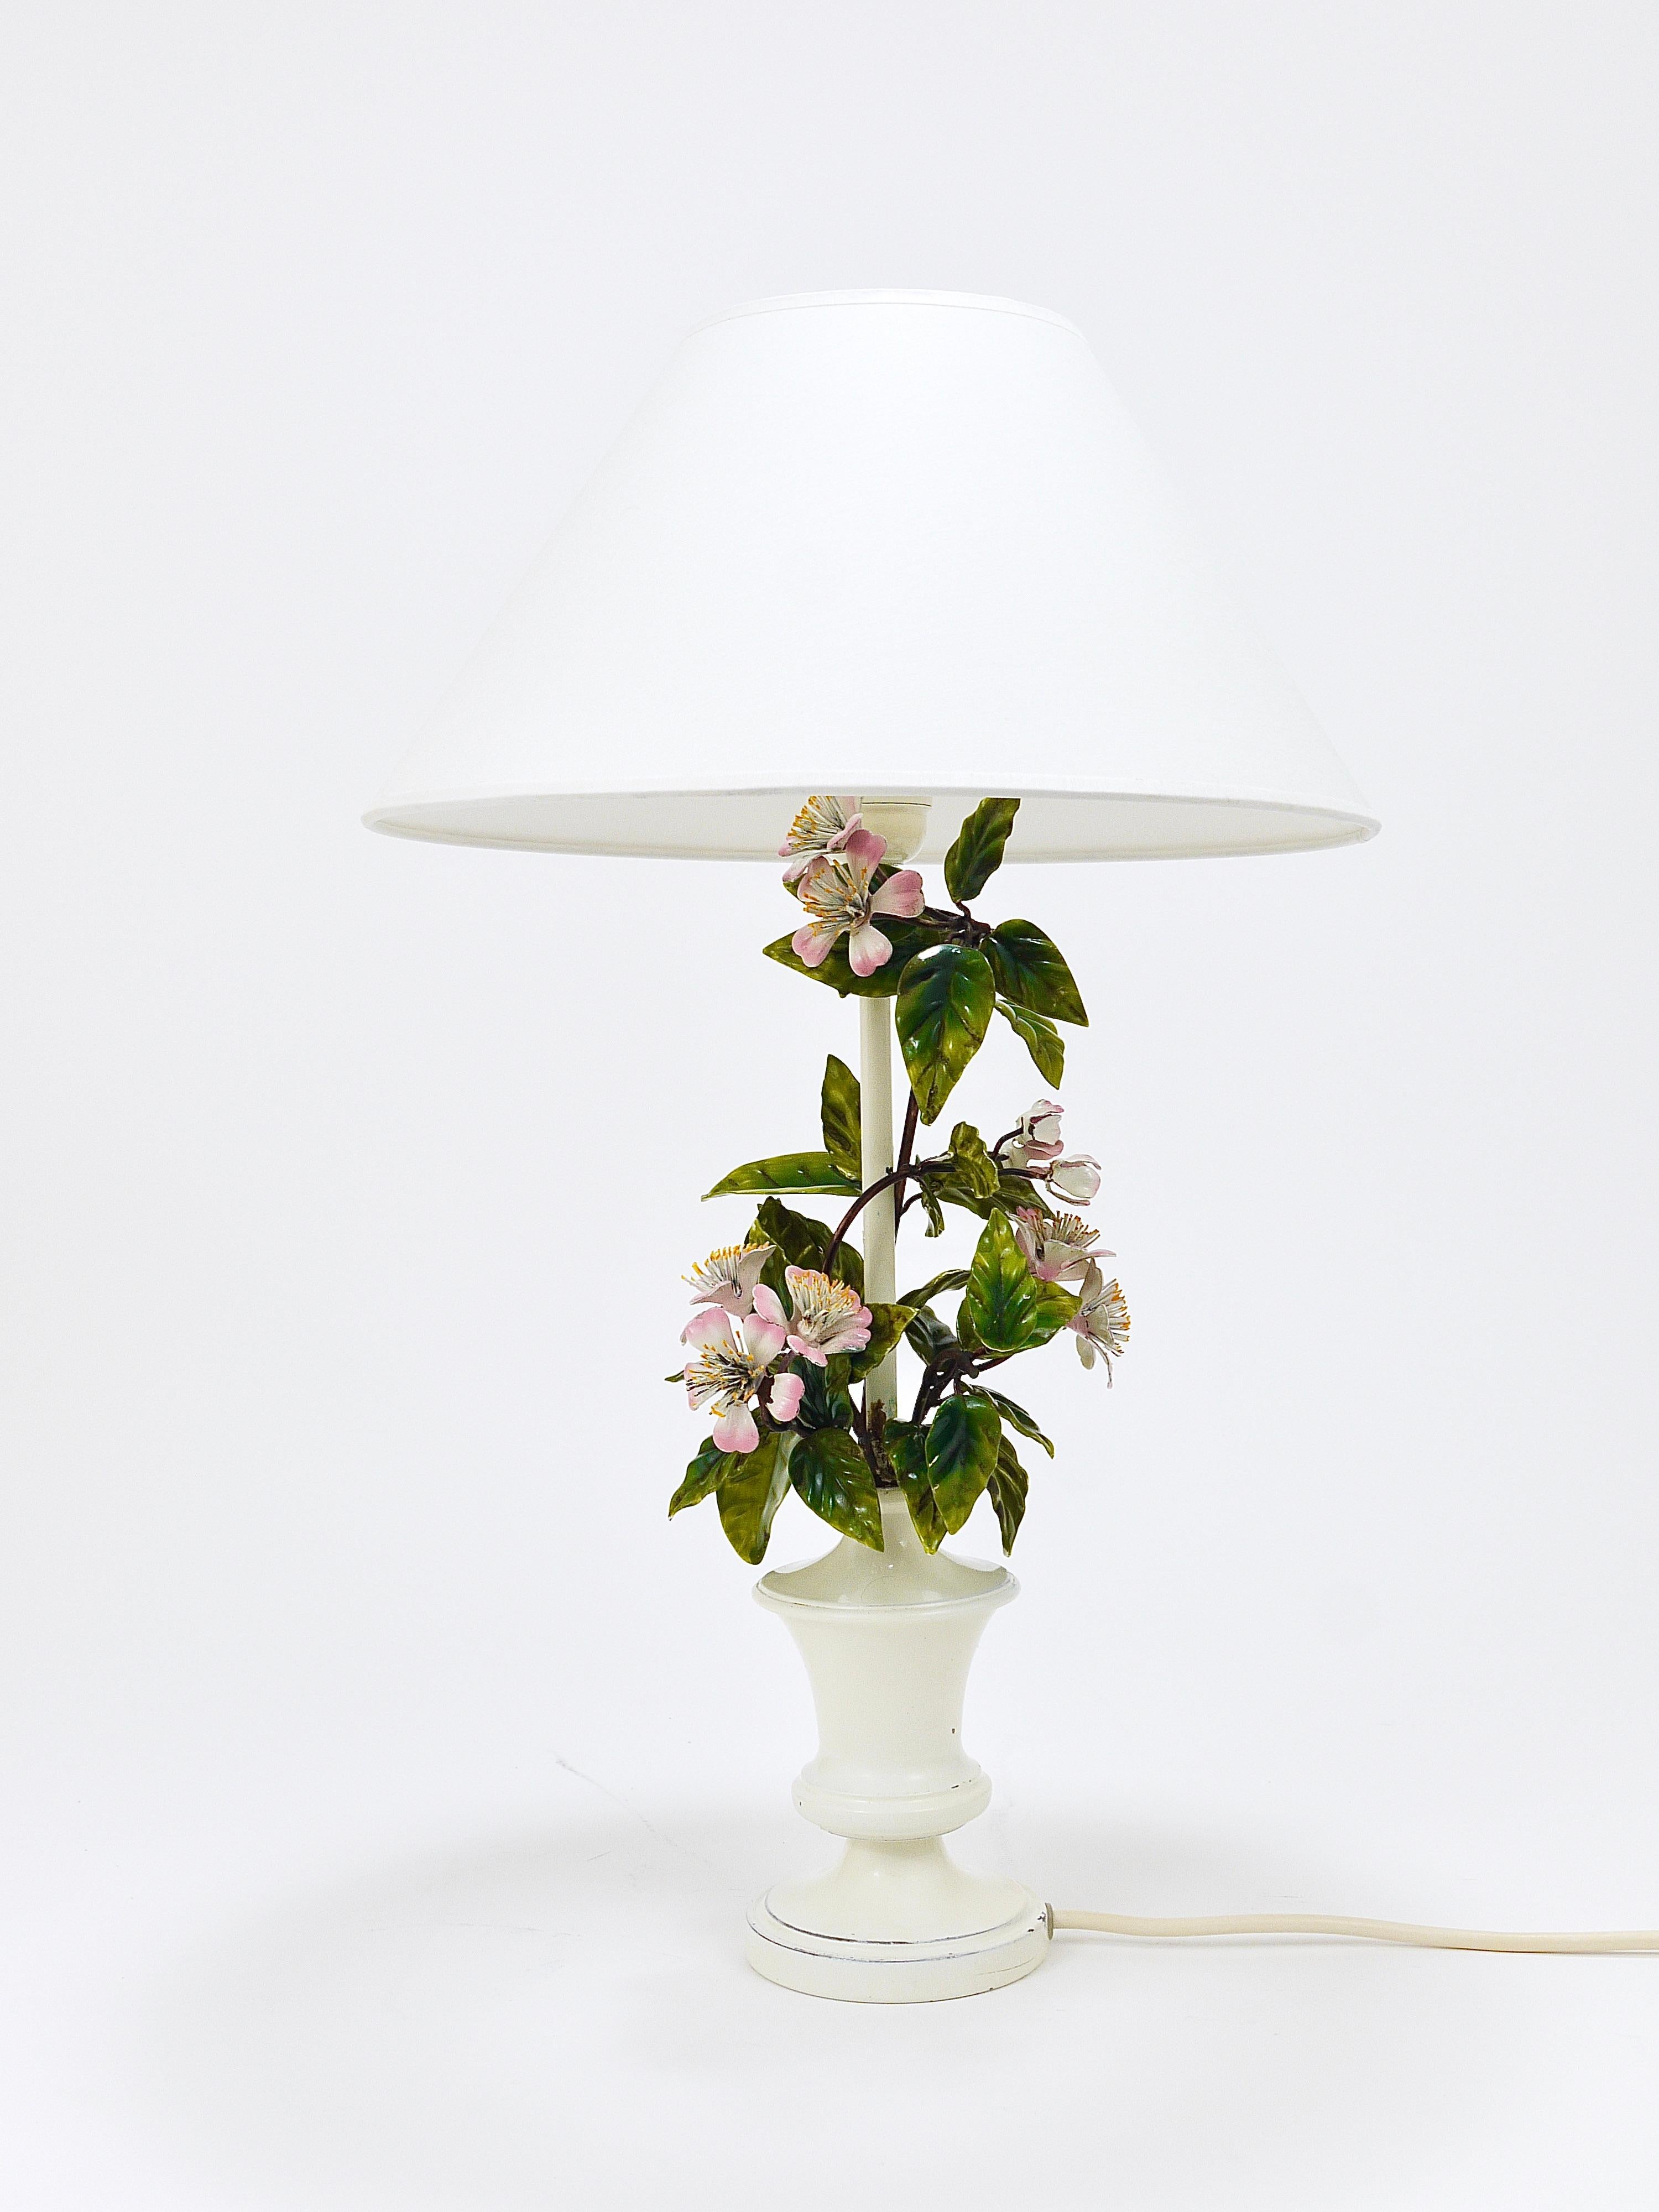 Metal Salvadori Hand Painted Wild Apple Blossom Toleware Table Lamp, Italy, 1950s For Sale